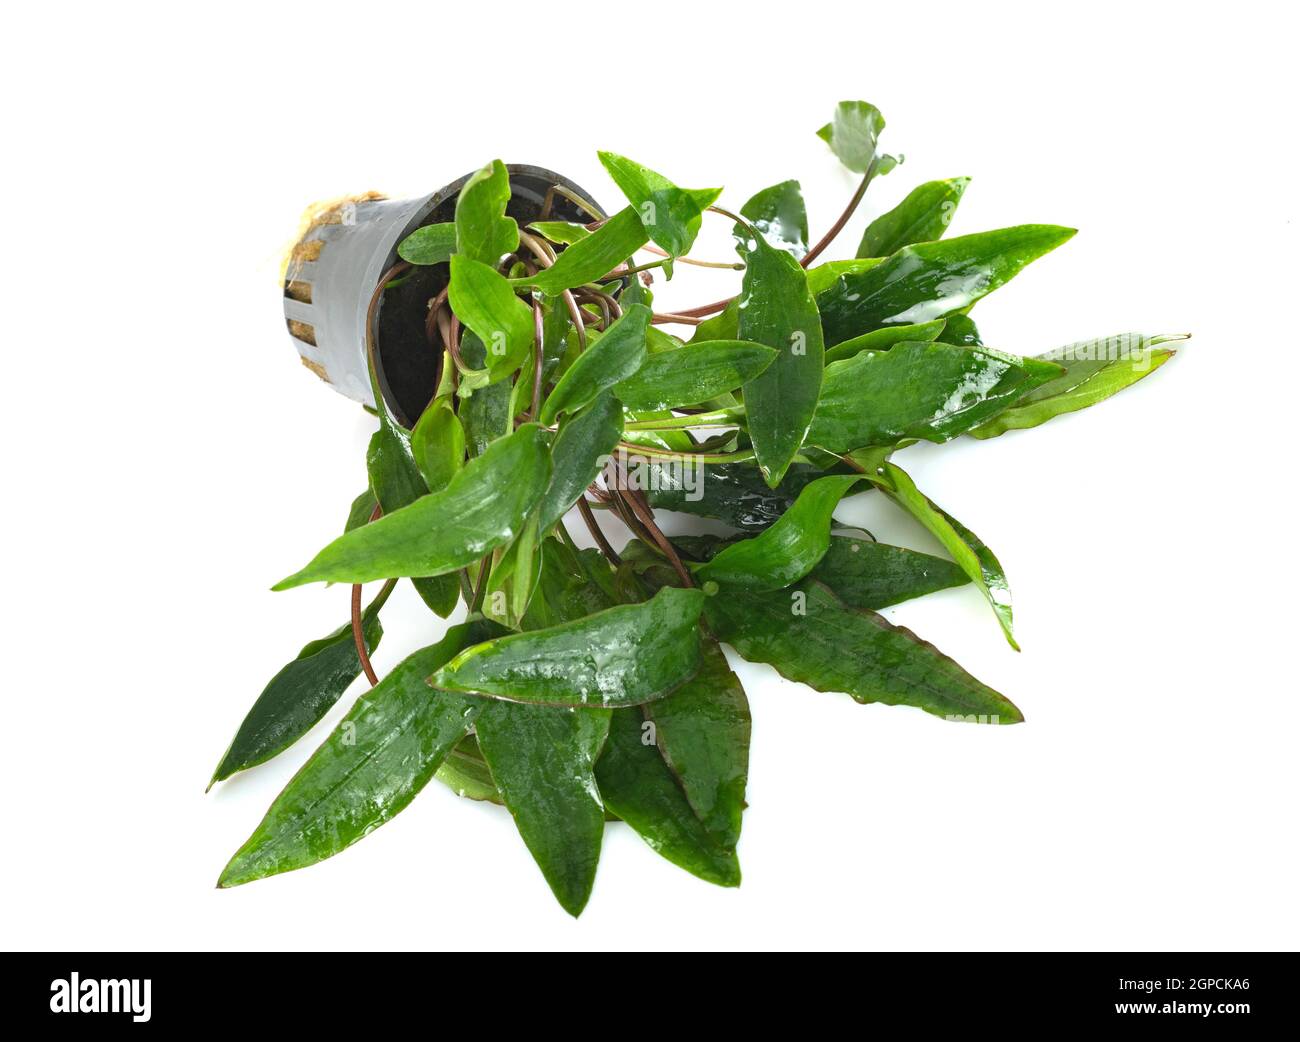 Cryptocoryne affinis in front of white background Stock Photo